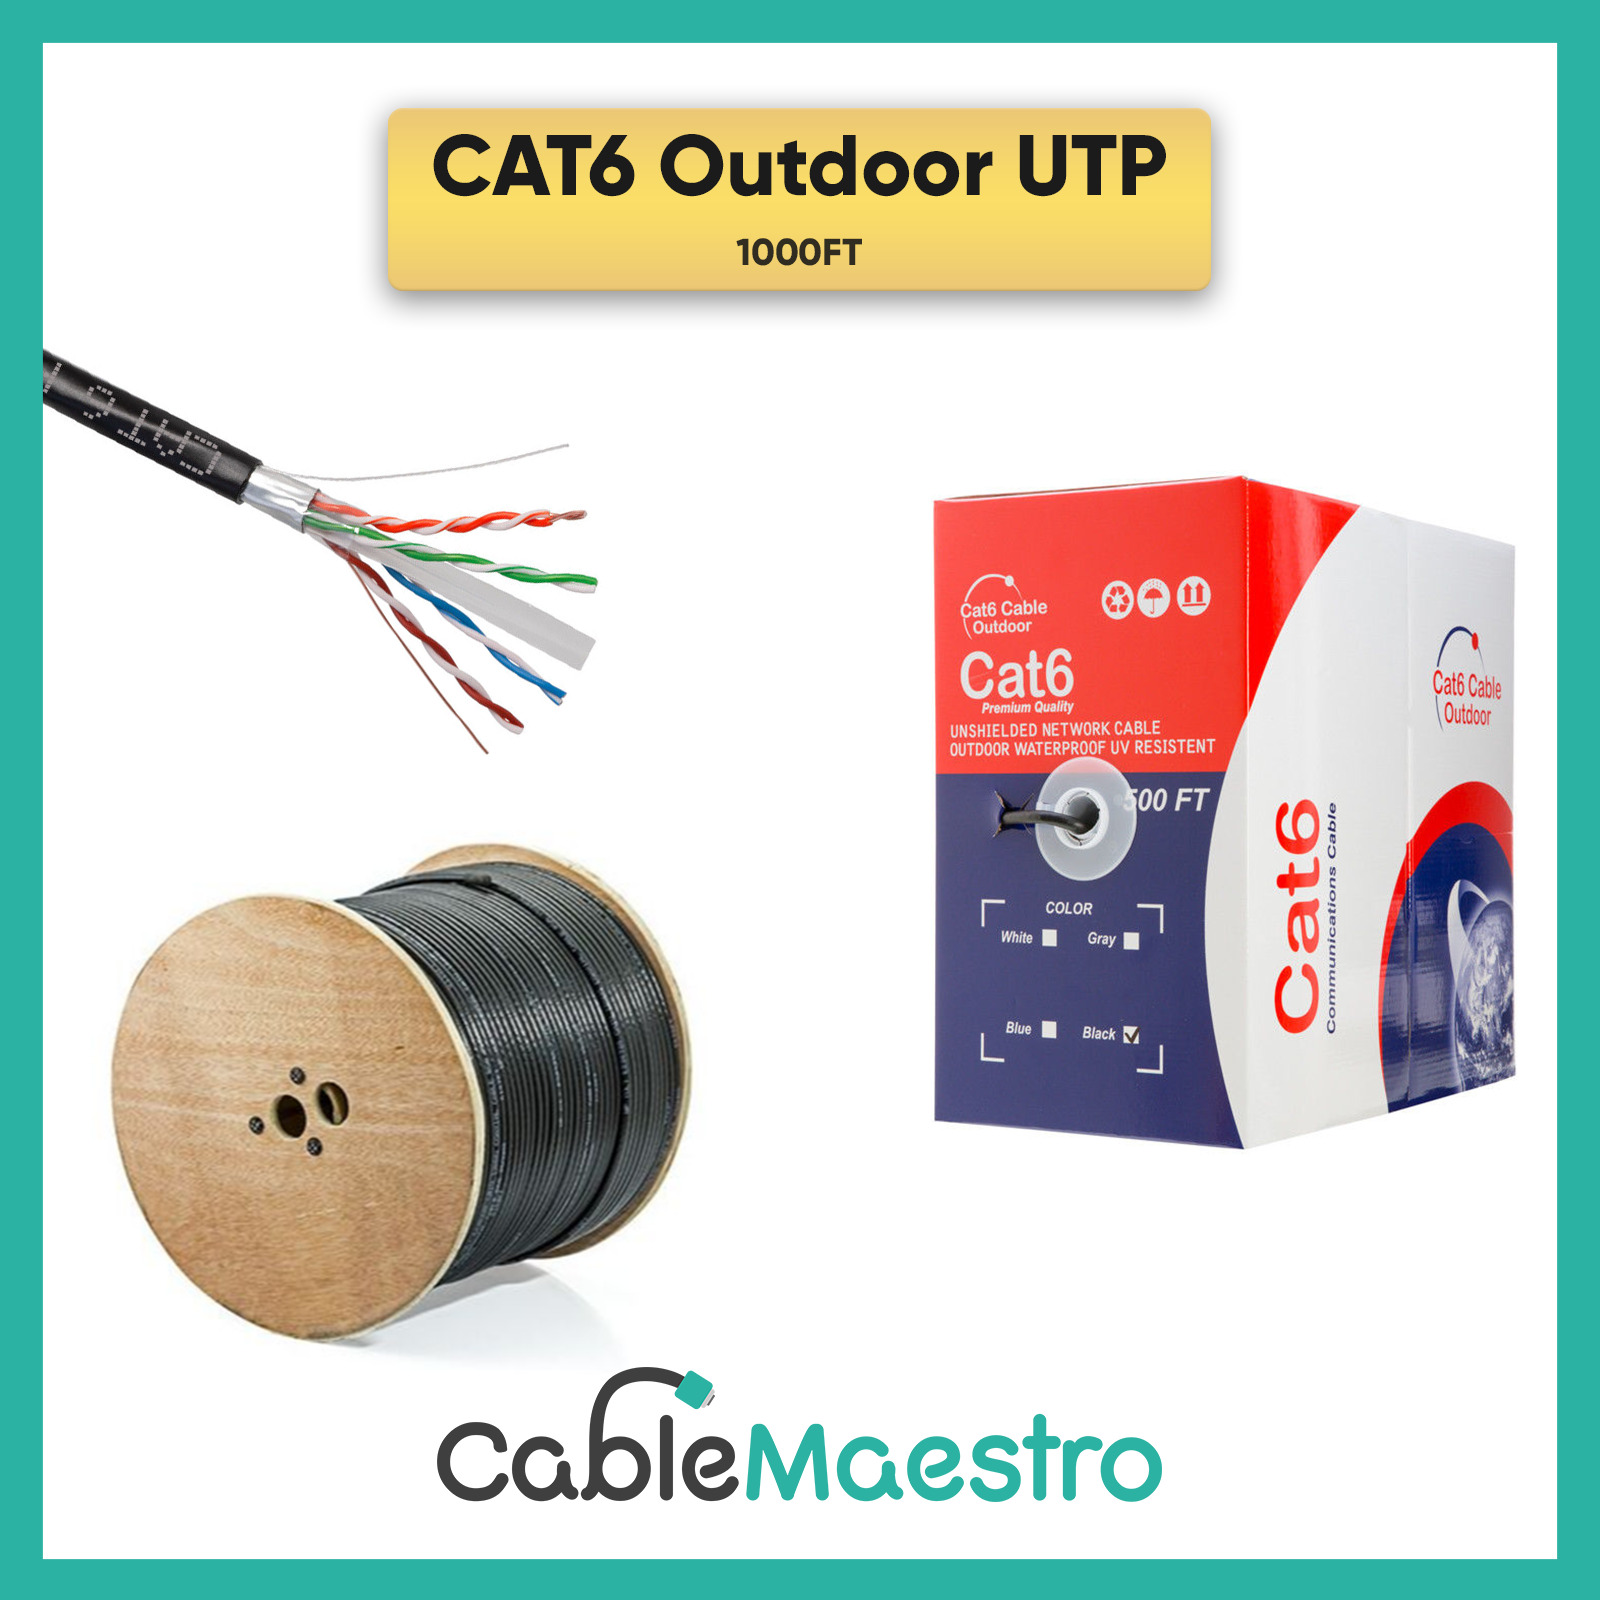 CAT6 Cable Outdoor 500FT 1000FT UTP FTP Ethernet 23 AWG Direct Burial Bulk 